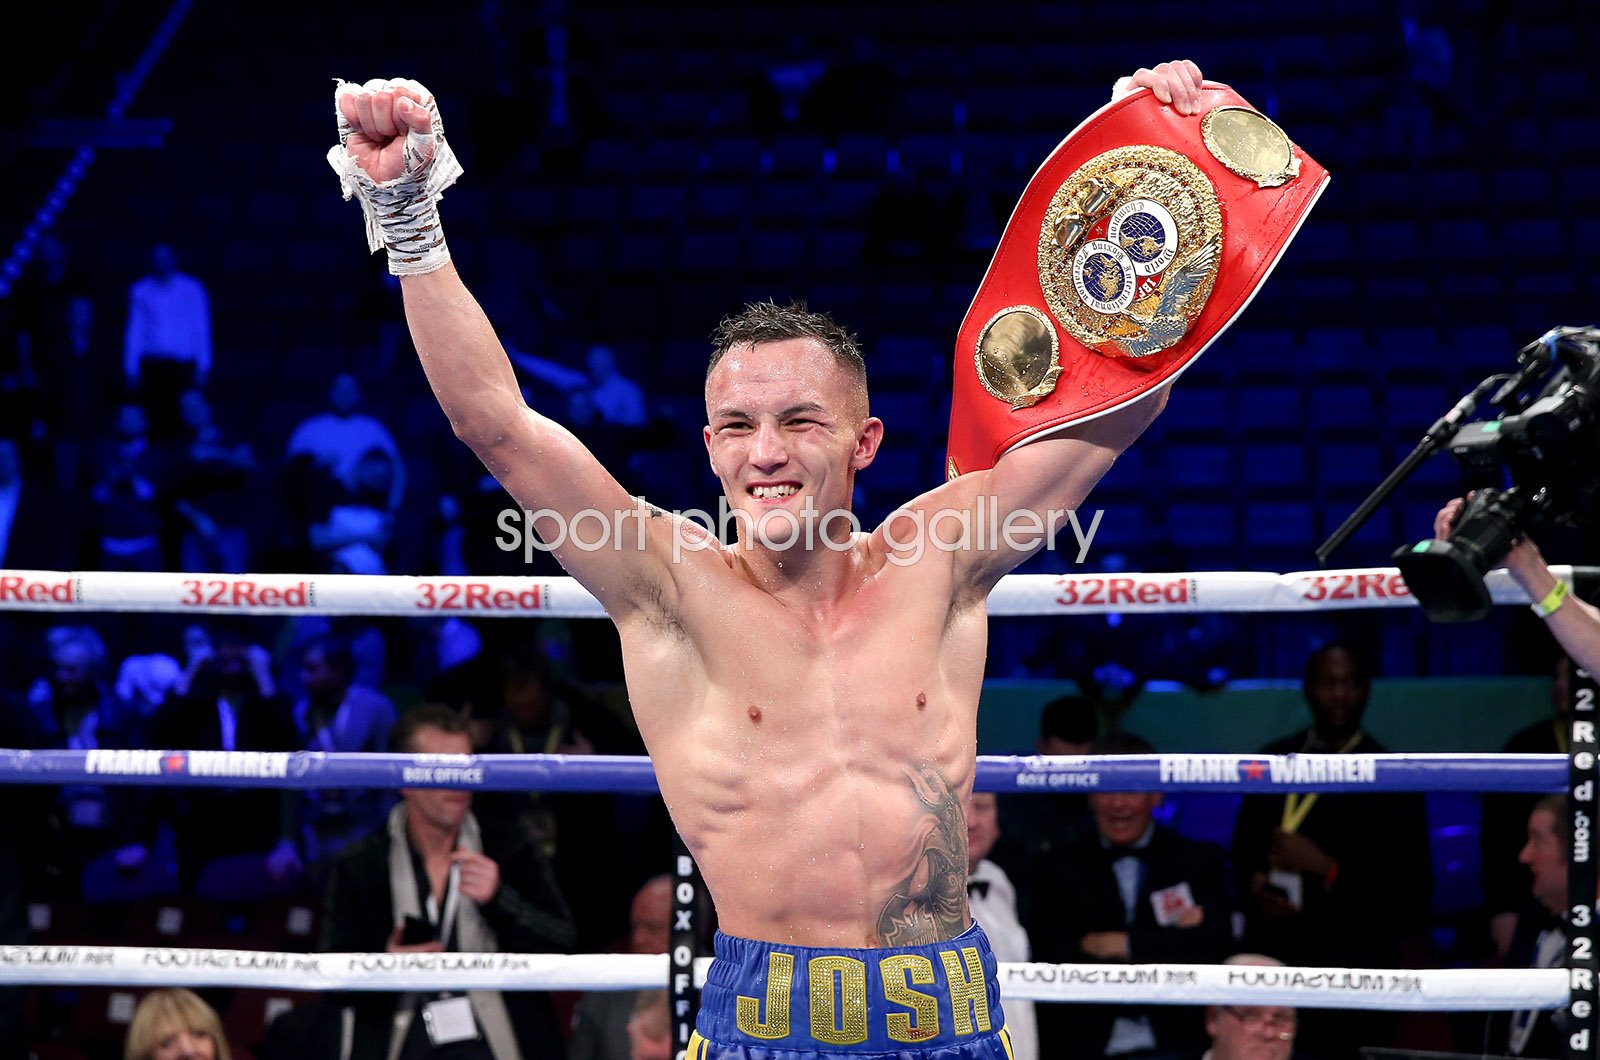 Josh IBF World Featherweight Champion Manchester 2018 Images | Boxing Posters